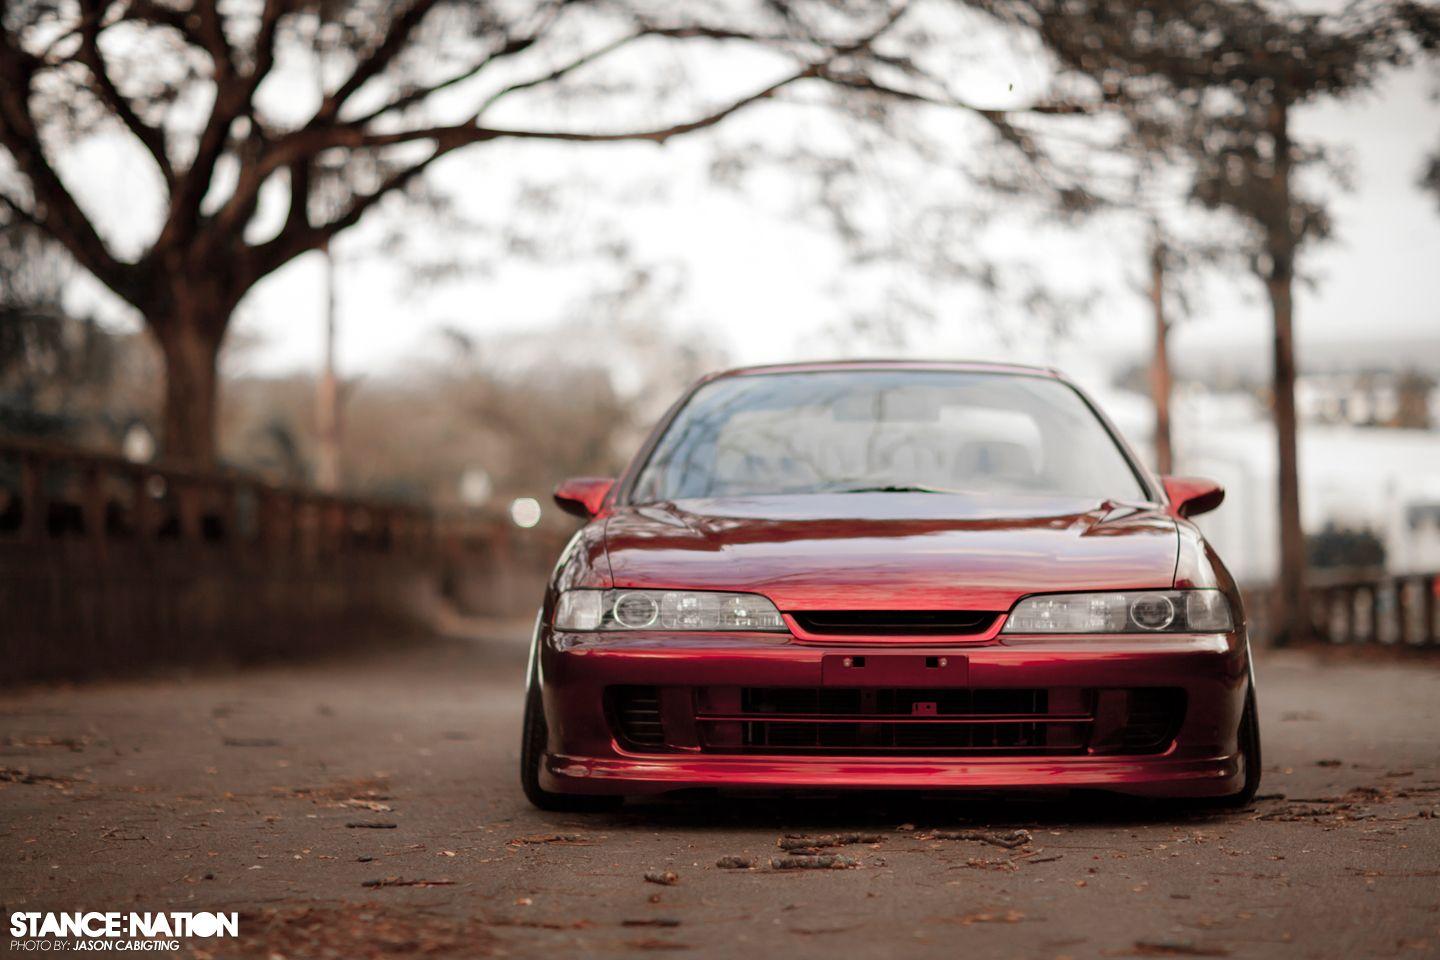 Integra Type R on the low side.